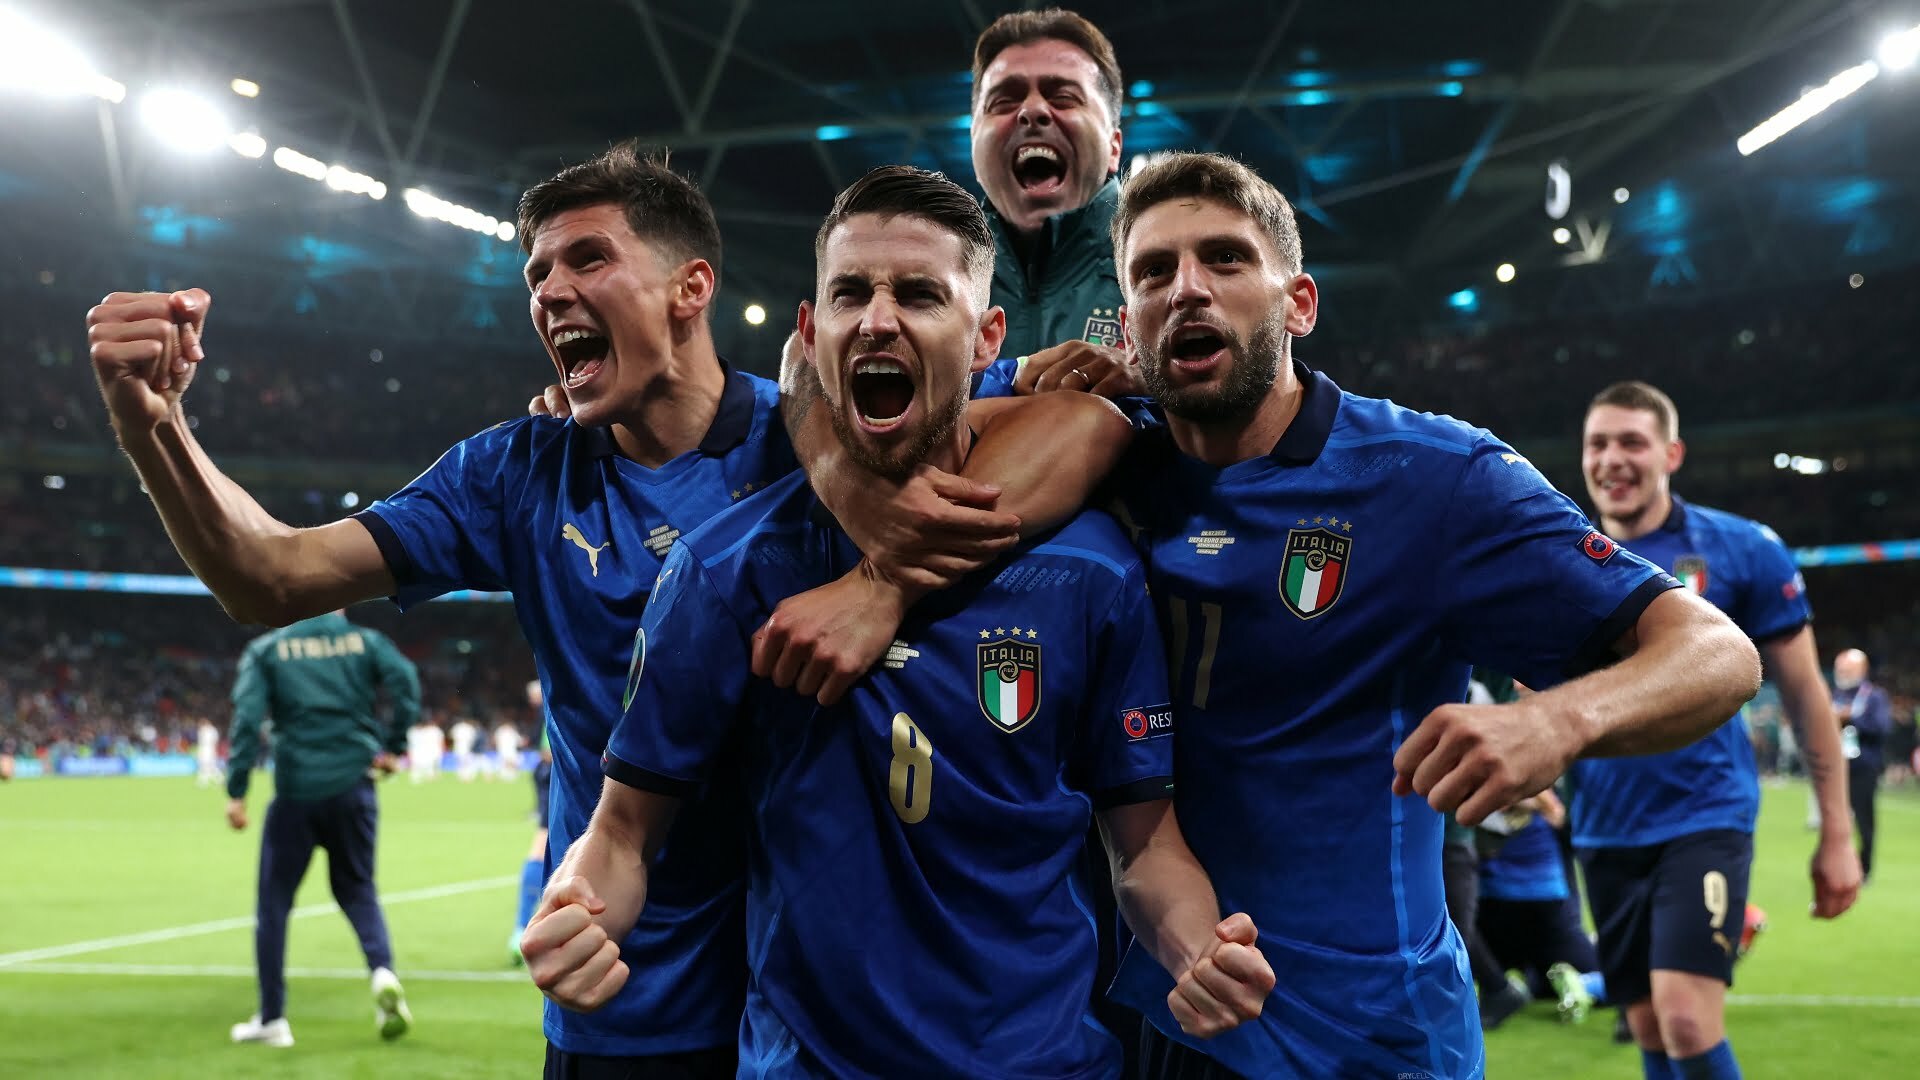 2022 Argentina Vs Italy Wallpapers Wallpaper Cave